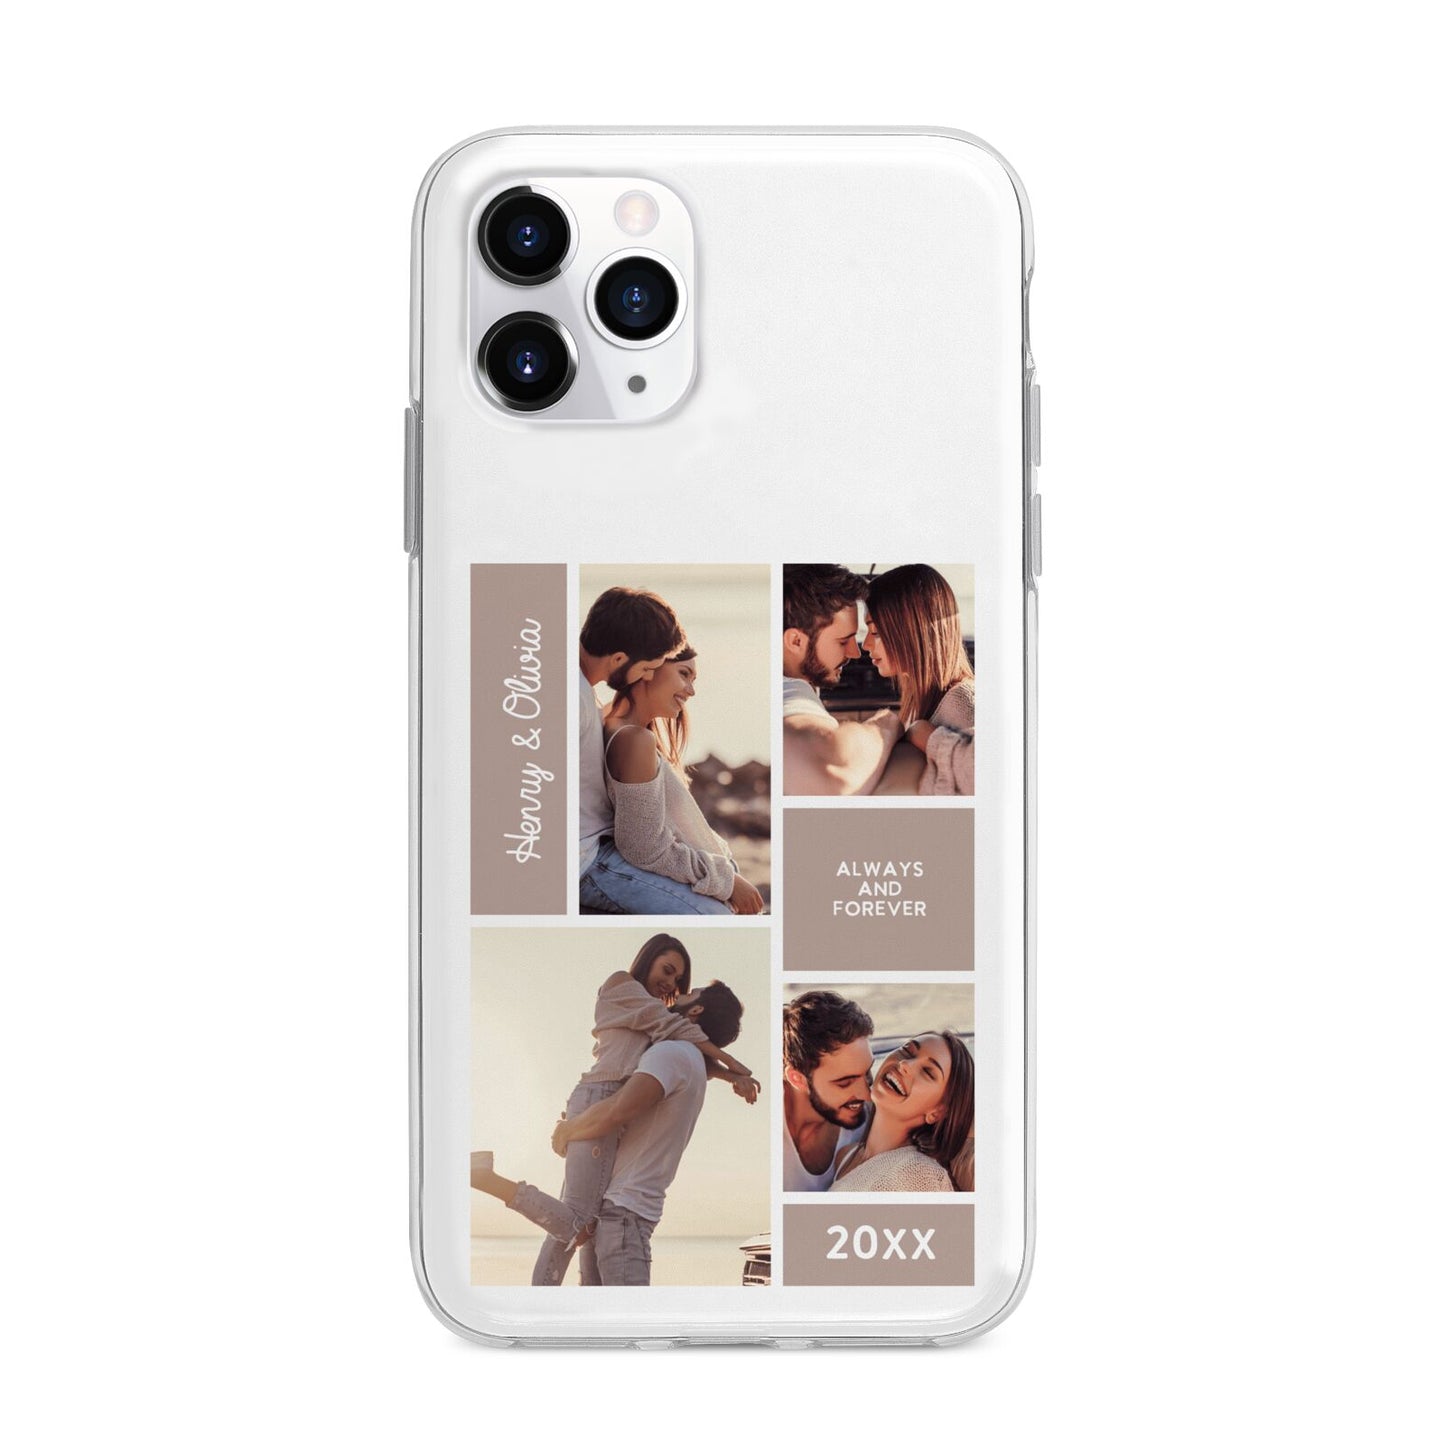 Couples Valentine Photo Collage Personalised Apple iPhone 11 Pro in Silver with Bumper Case